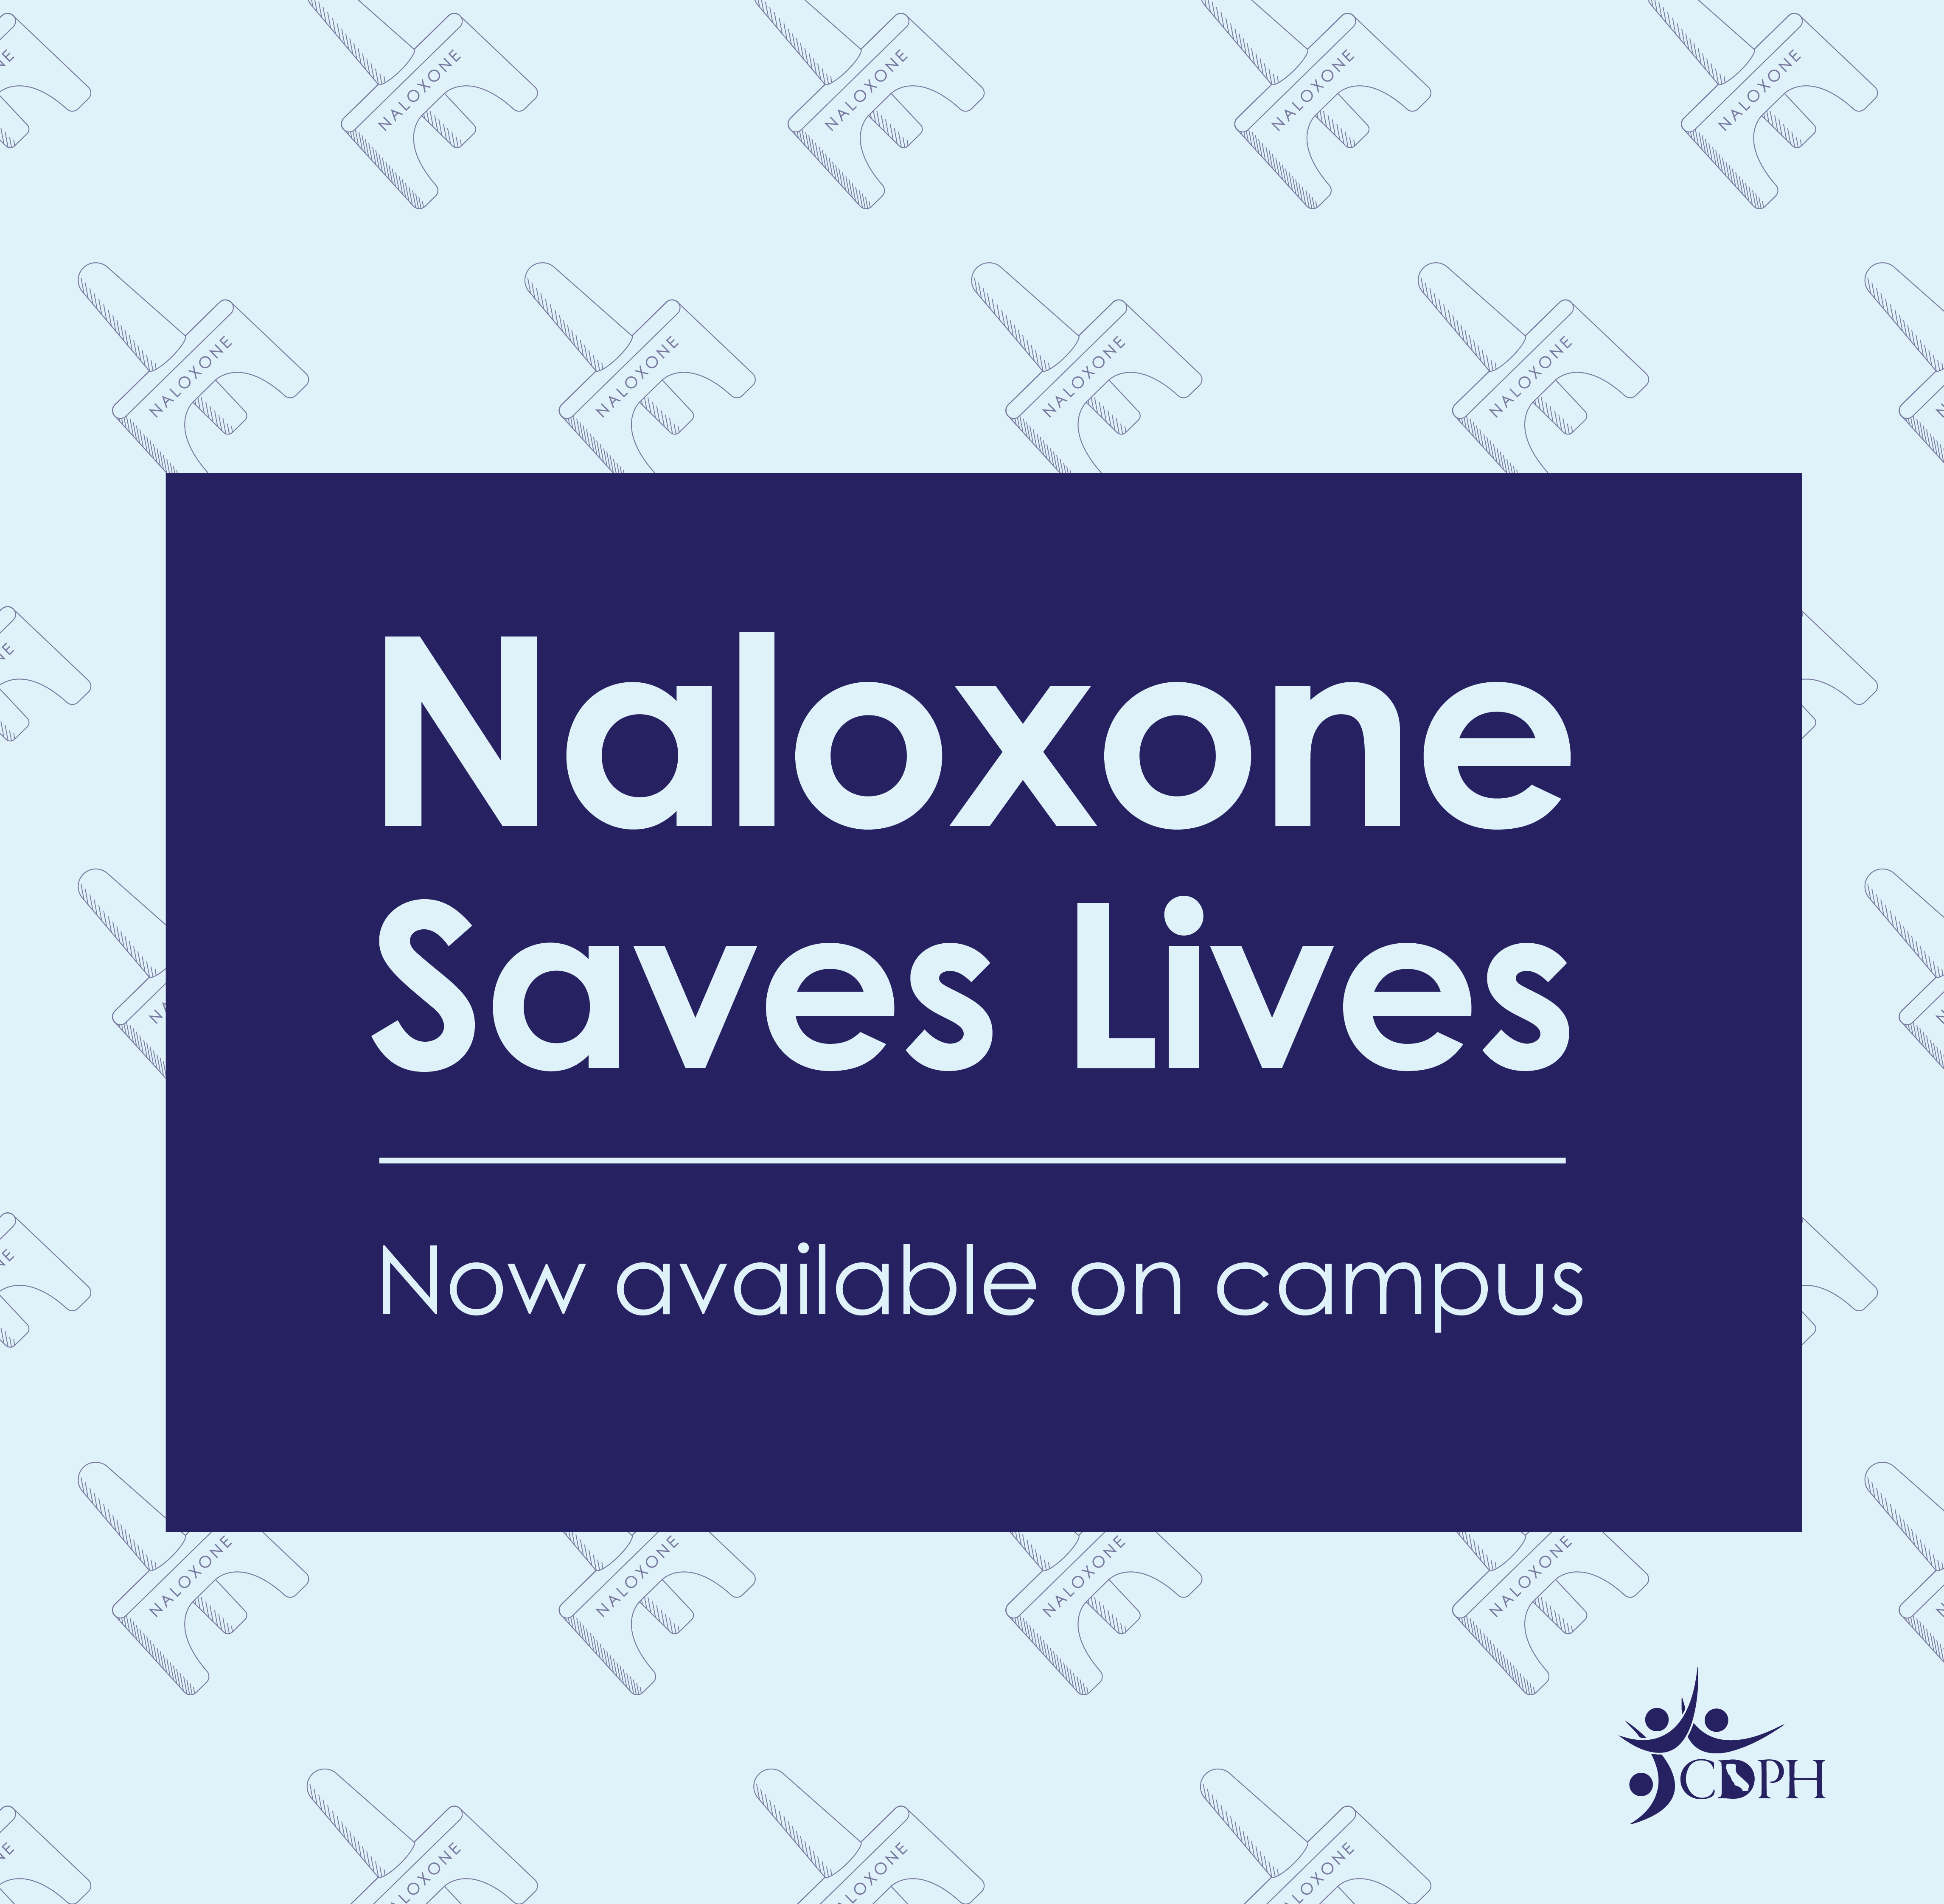 Naloxone Saves Lives Now avaiable on campus